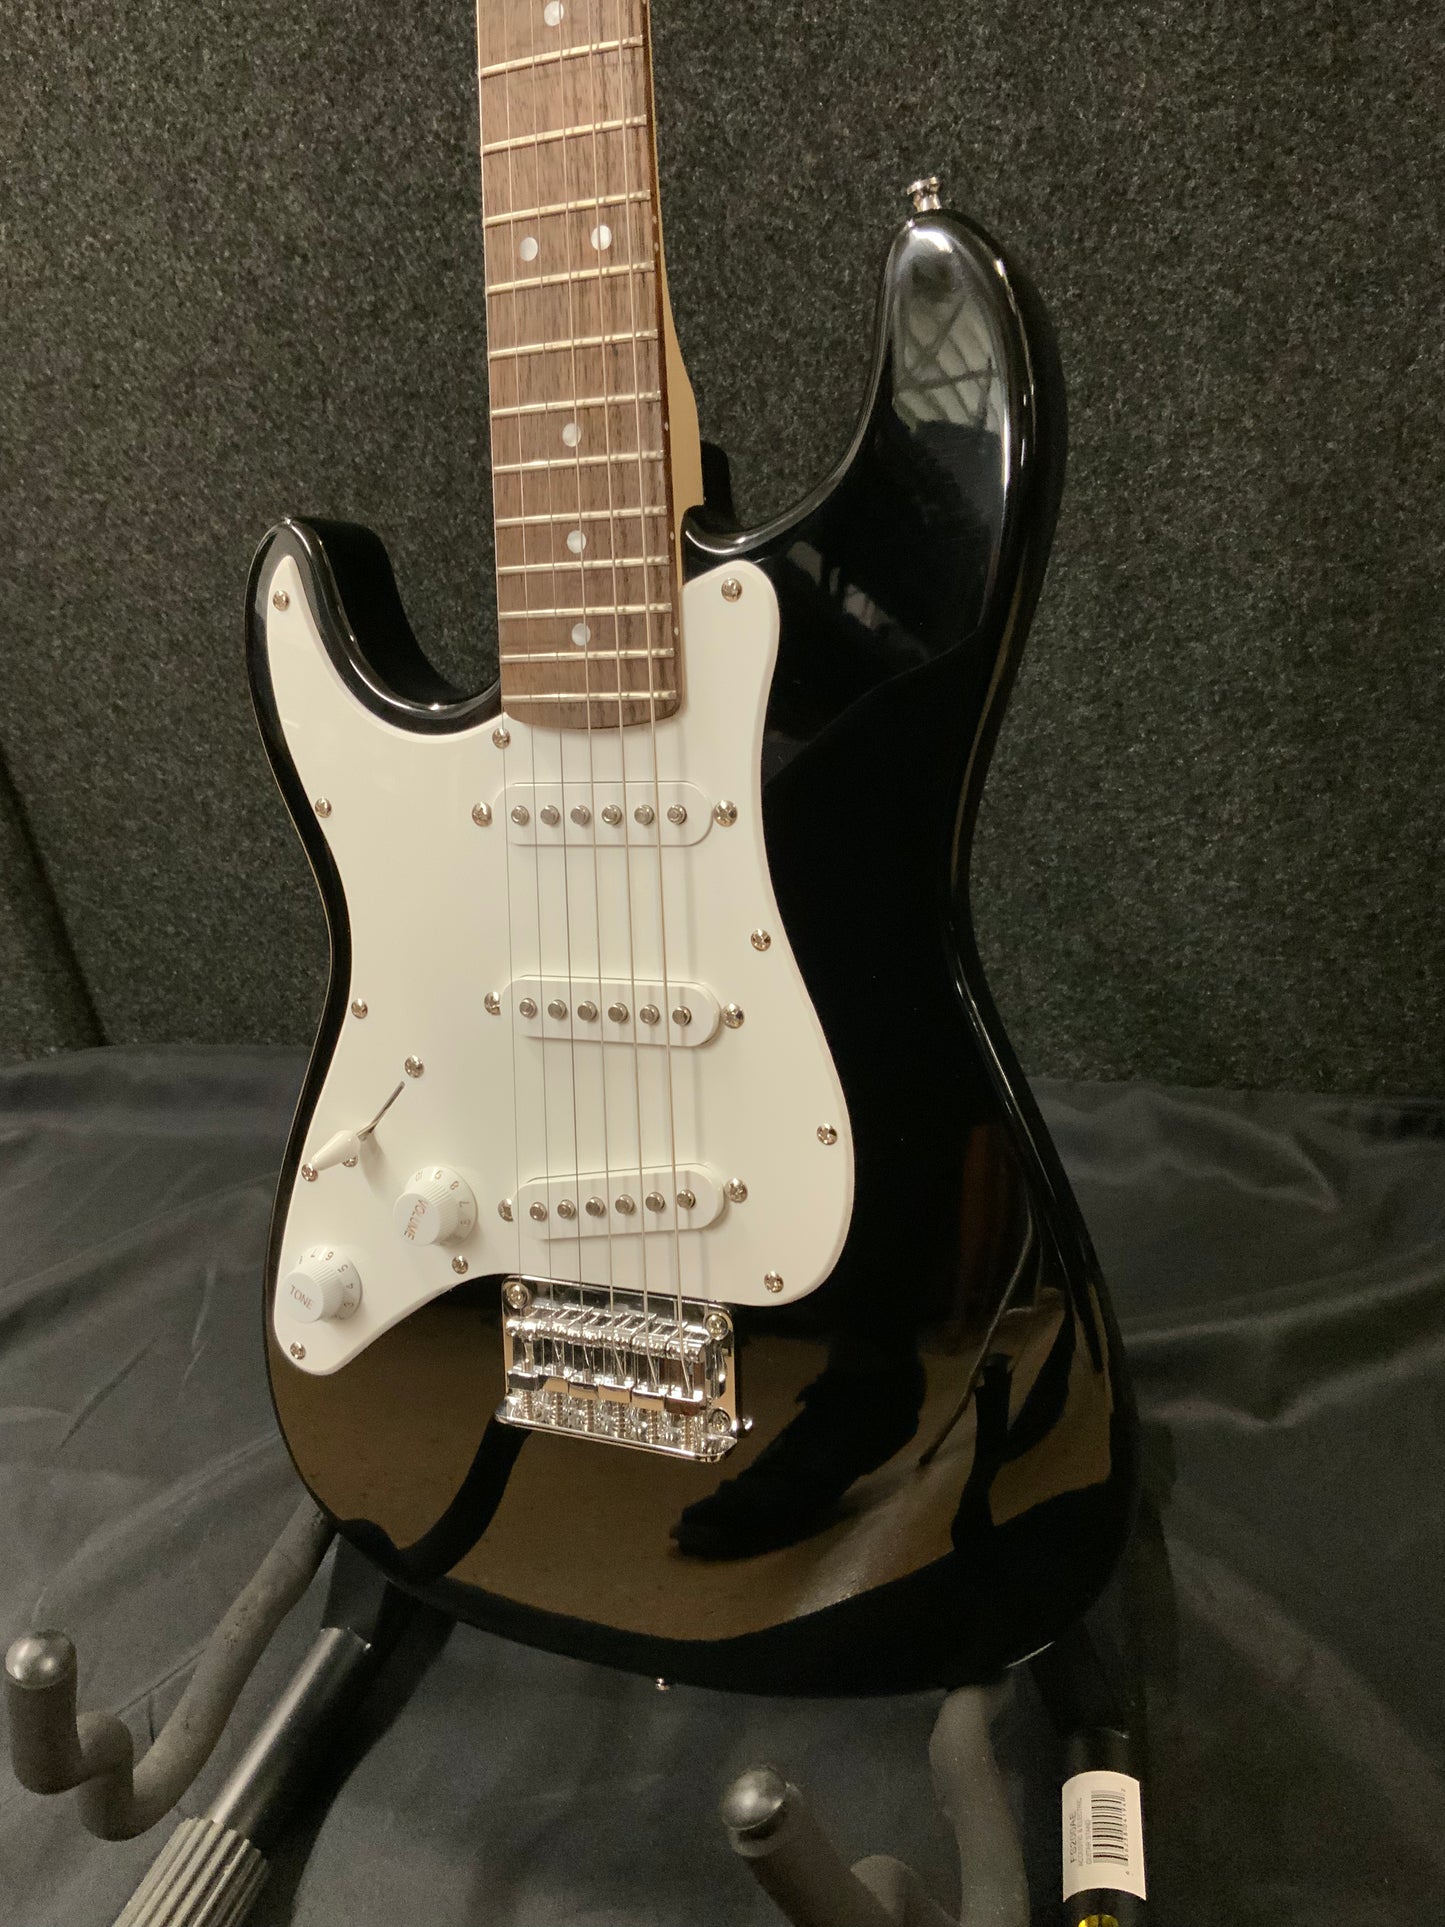 Squier Mini Strat LH Left Handed - Black (used-near mint factory 2nd)